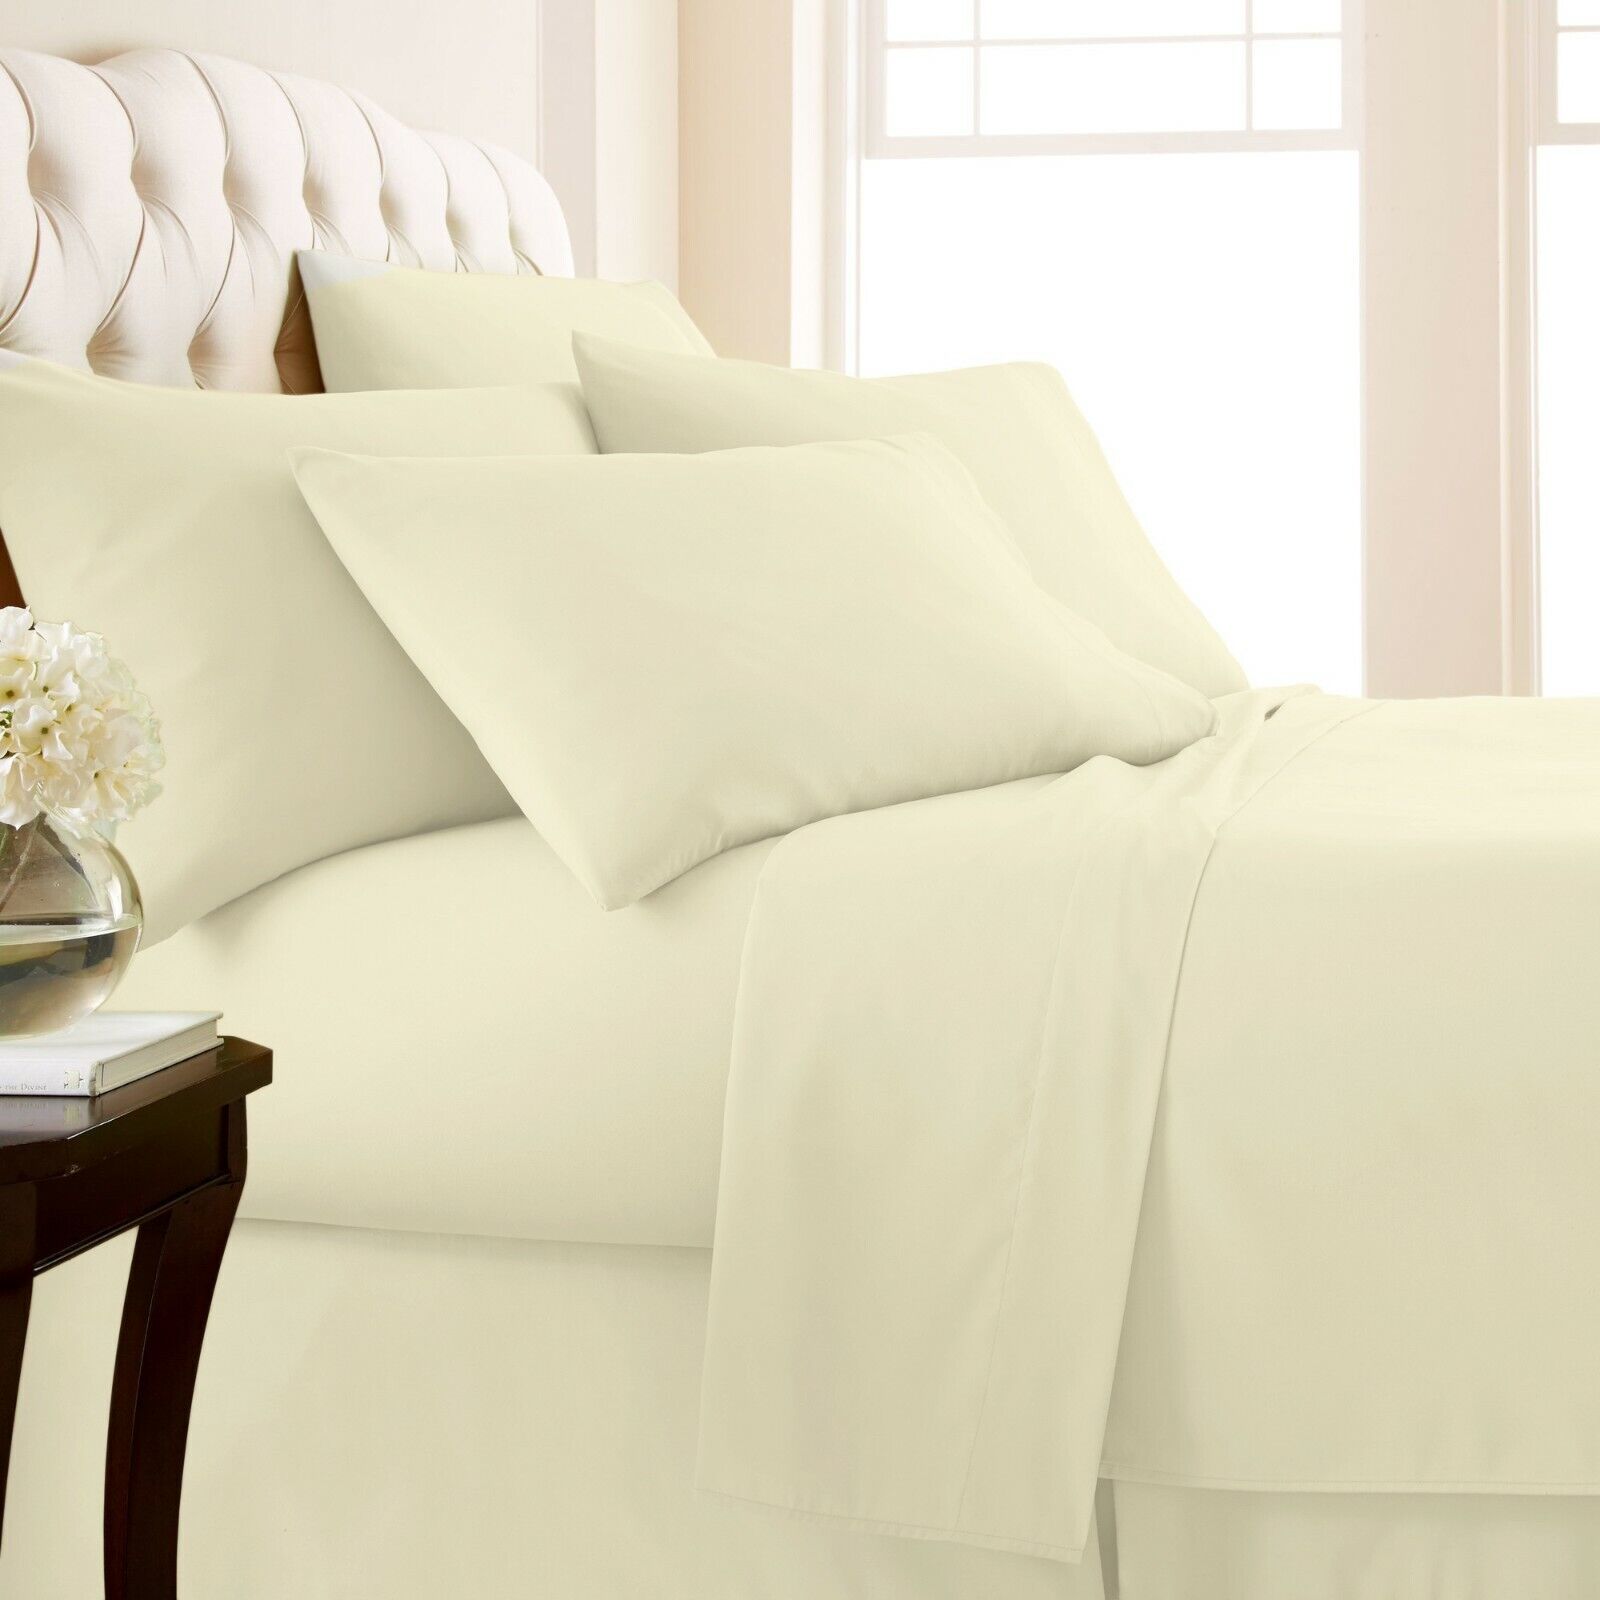 4-Piece: Luxury Home 1000 Thread Count Egyptian Cotton Sheet Sets